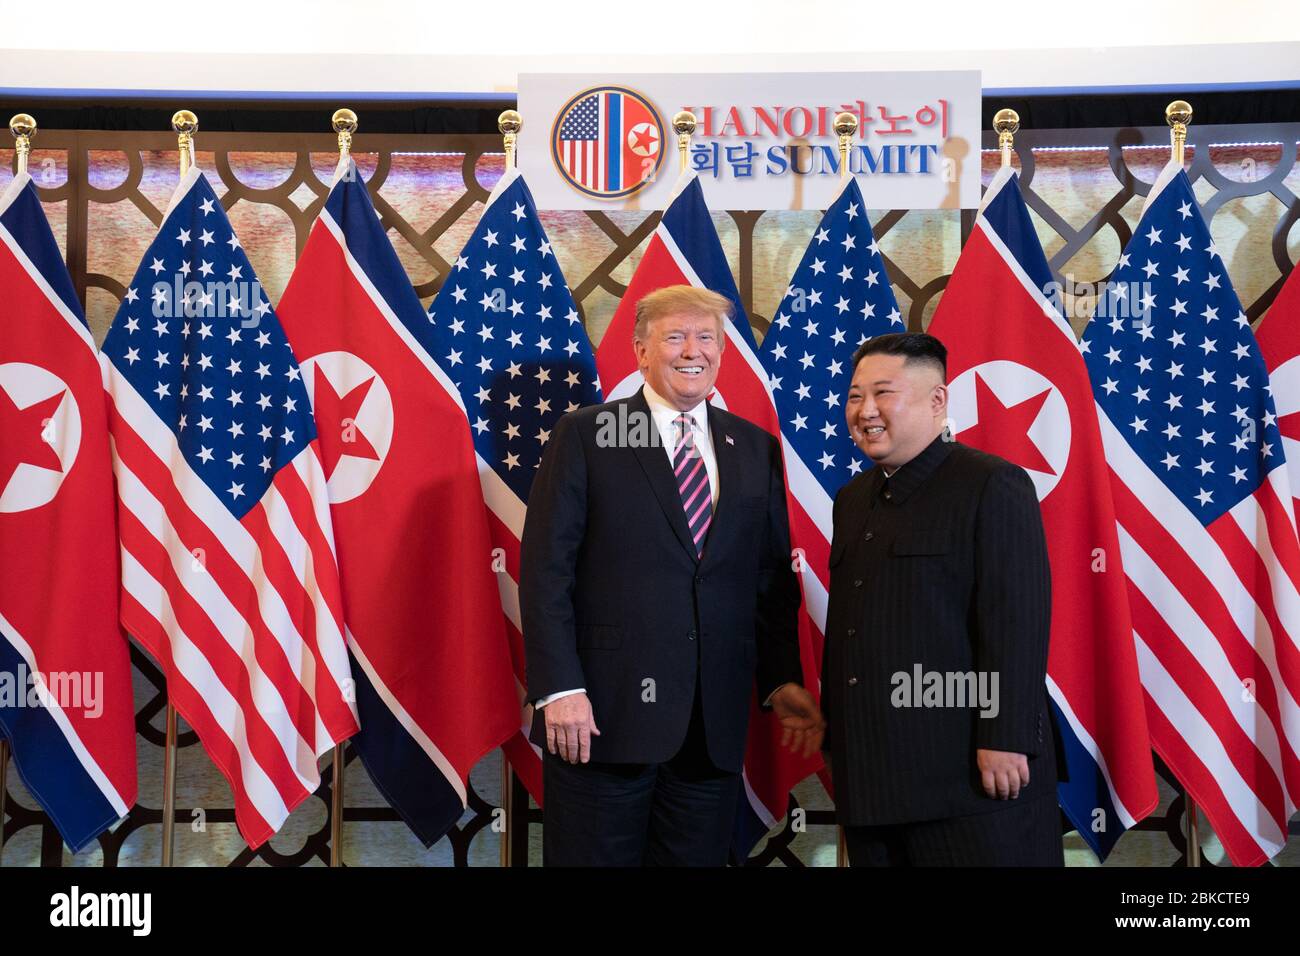 President Donald J. Trump is greeted by Kim Jong Un, Chairman of the State Affairs Commission of the Democratic People’s Republic of Korea Wednesday, Feb. 27, 2019, at the Sofitel Legend Metropole hotel in Hanoi, for their second summit meeting. President Trump's Trip to Vietnam Stock Photo